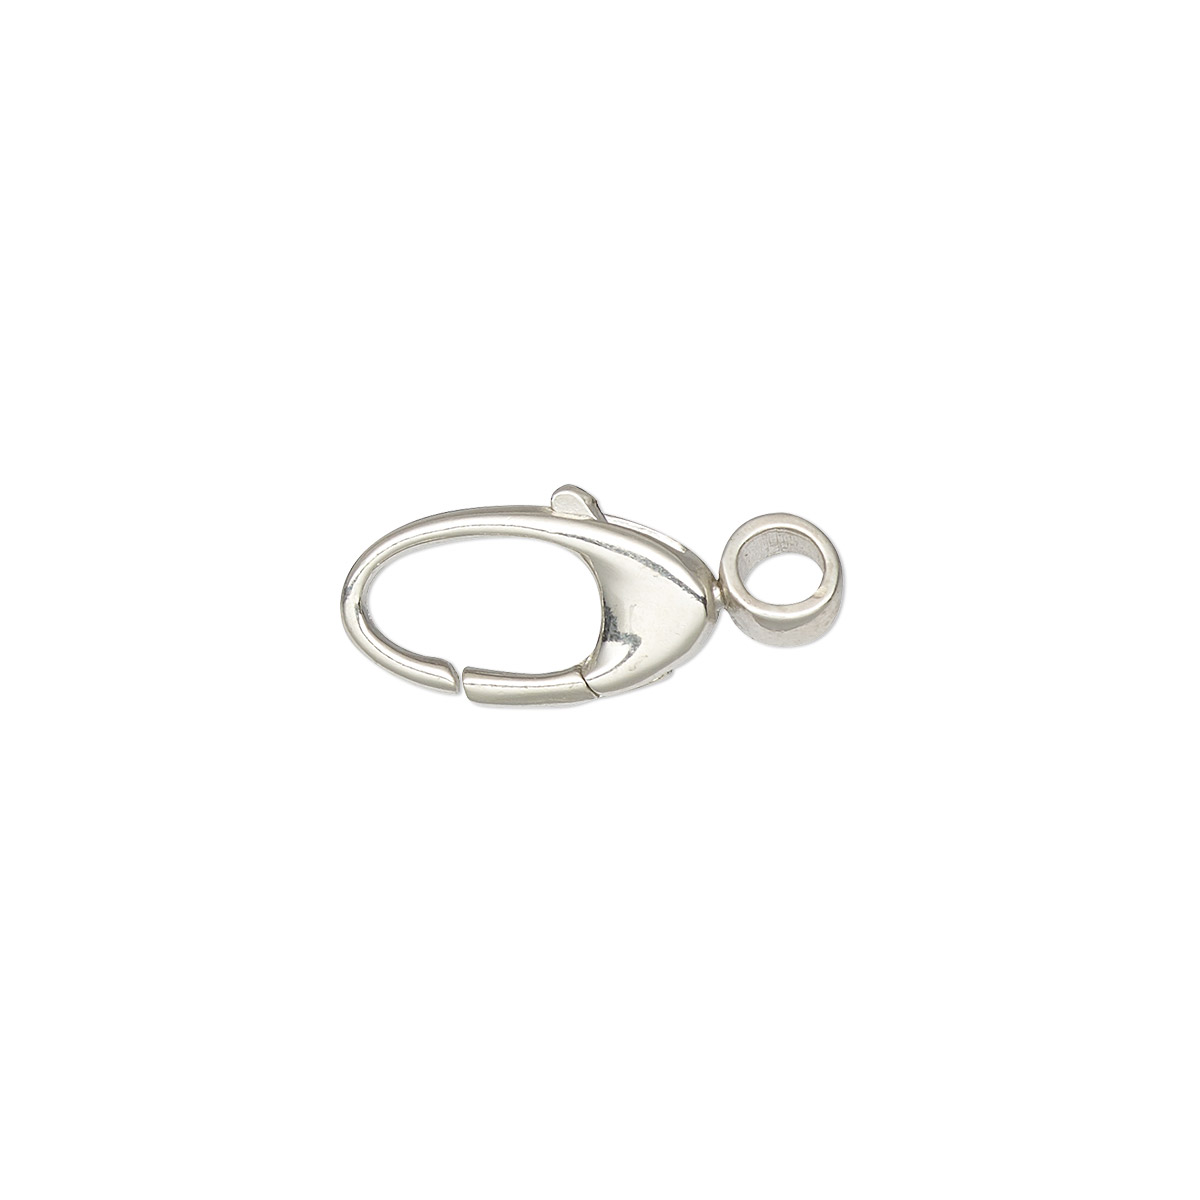 Clasp, lobster claw, sterling silver and steel, 12x6mm oval with swivel ...